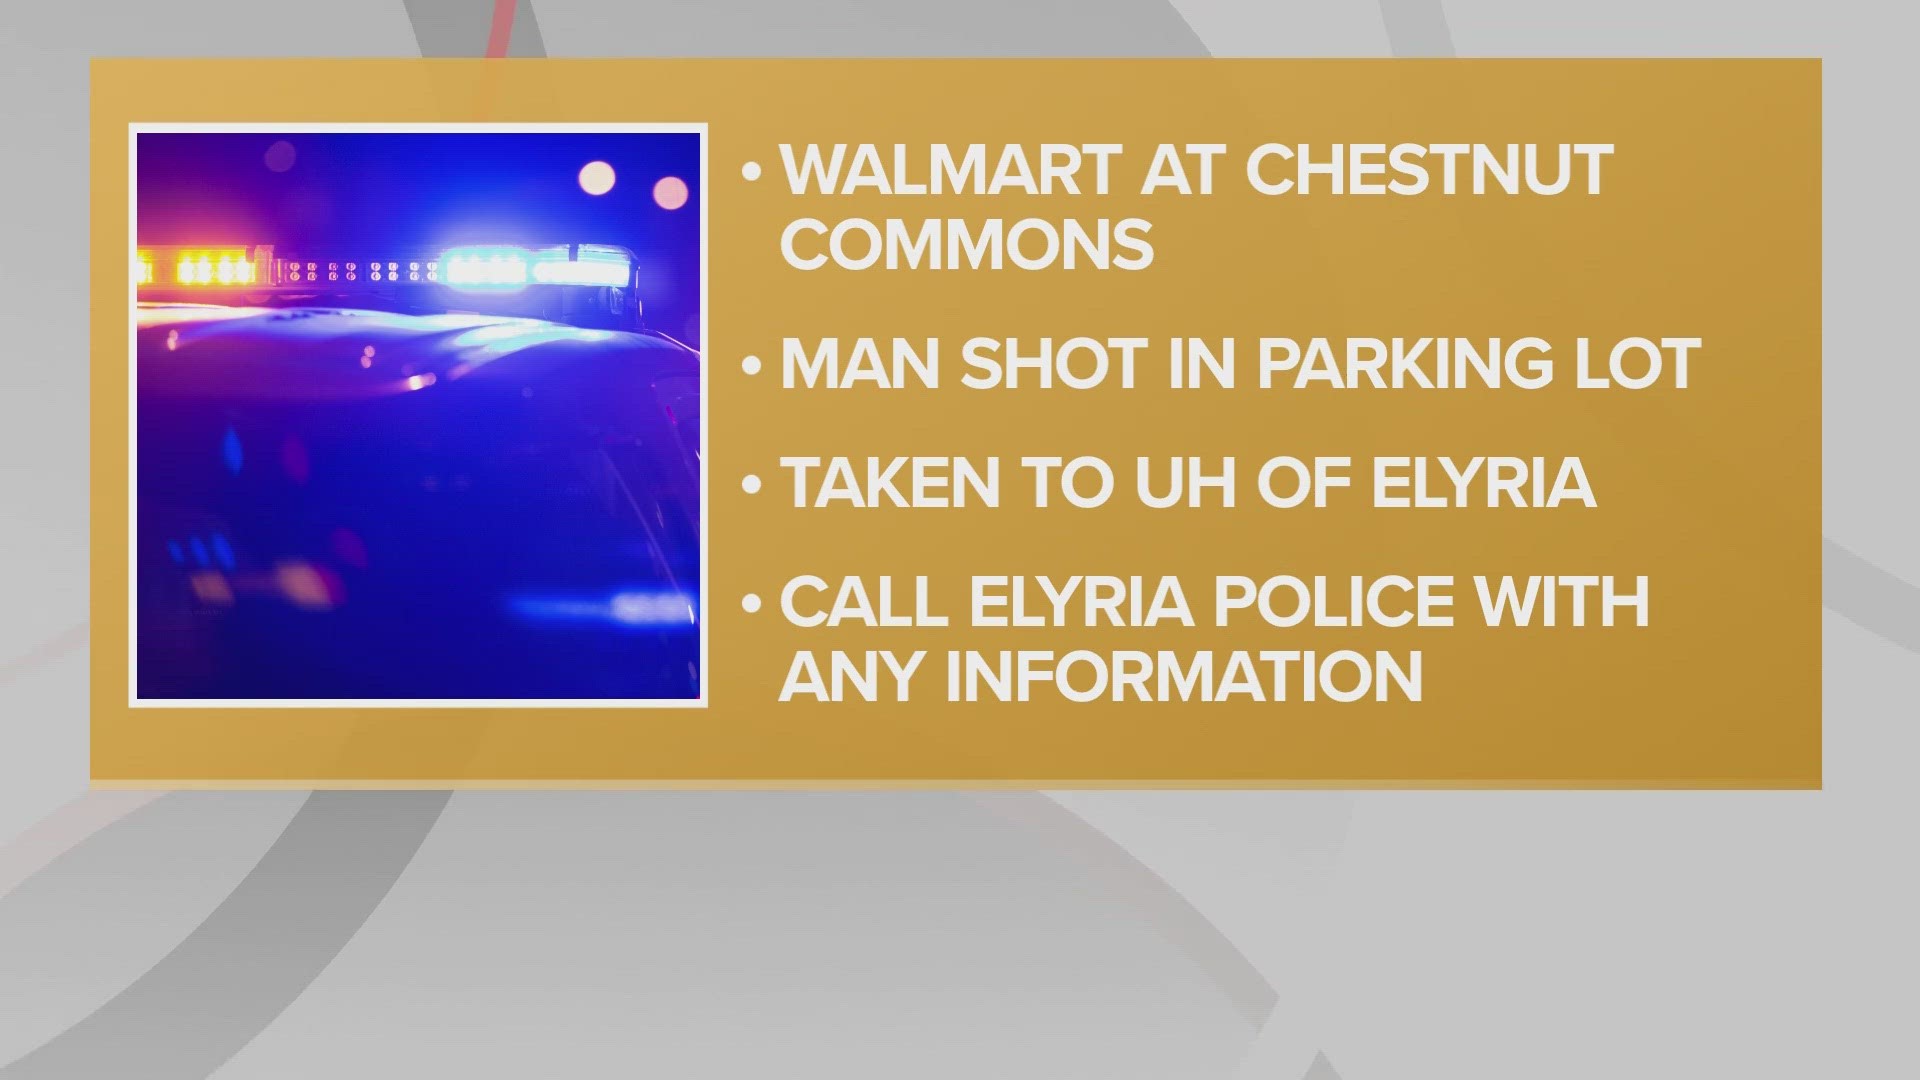 The Elyria Police Department is investigating after 1 male was injured following a shooting in the parking lot of Walmart on Thursday evening.